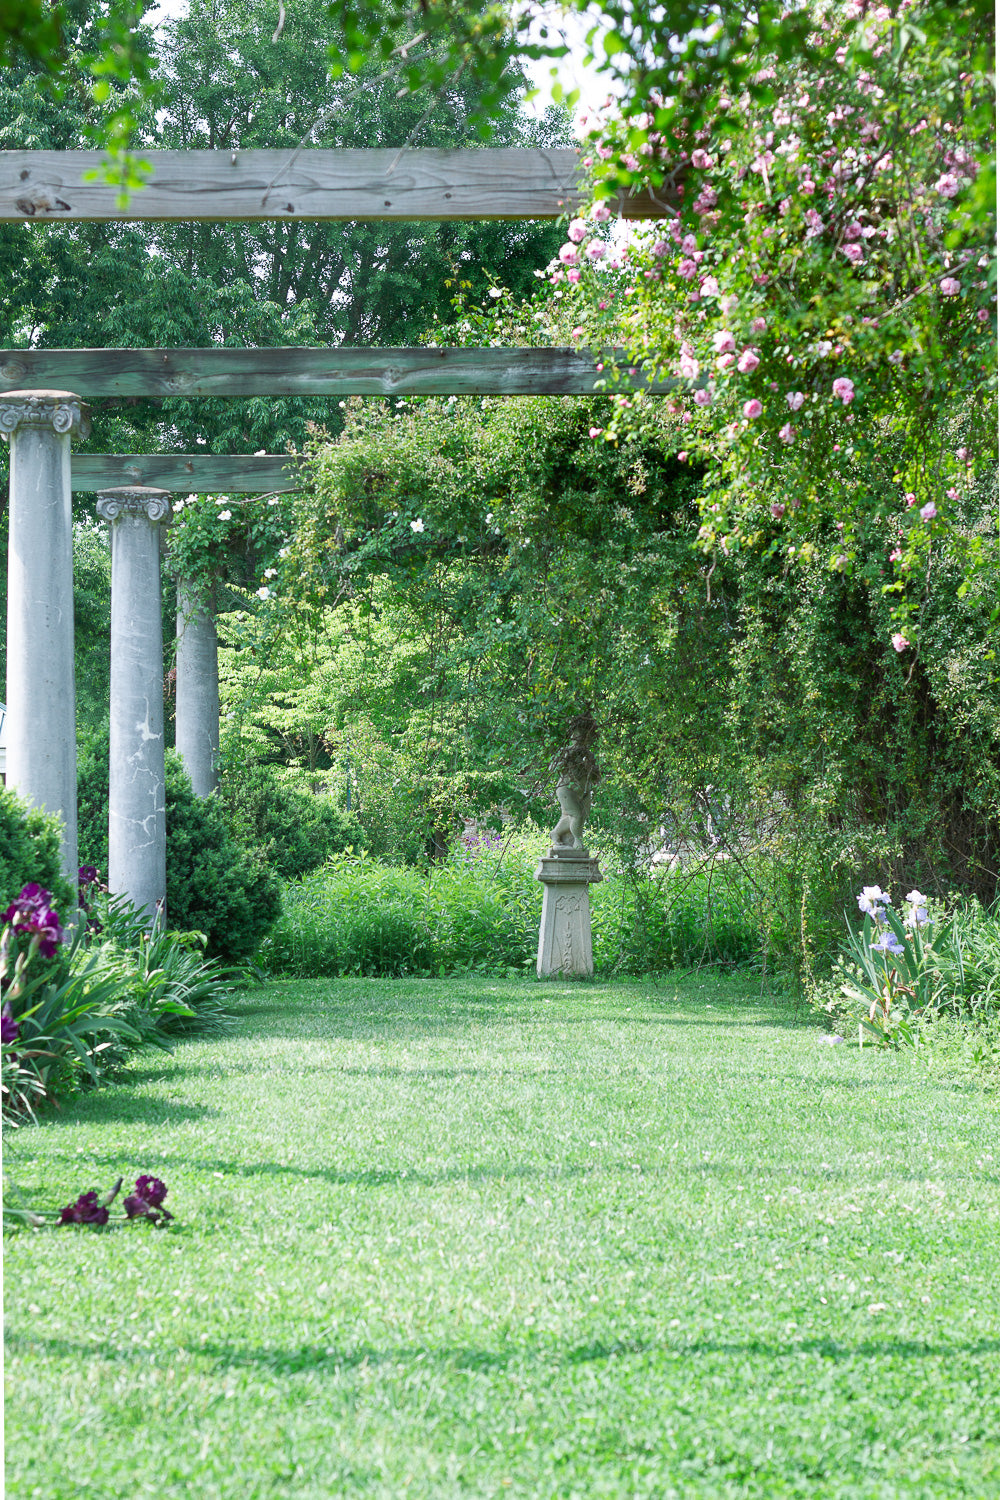 Chatham manor garden with statue and trellis